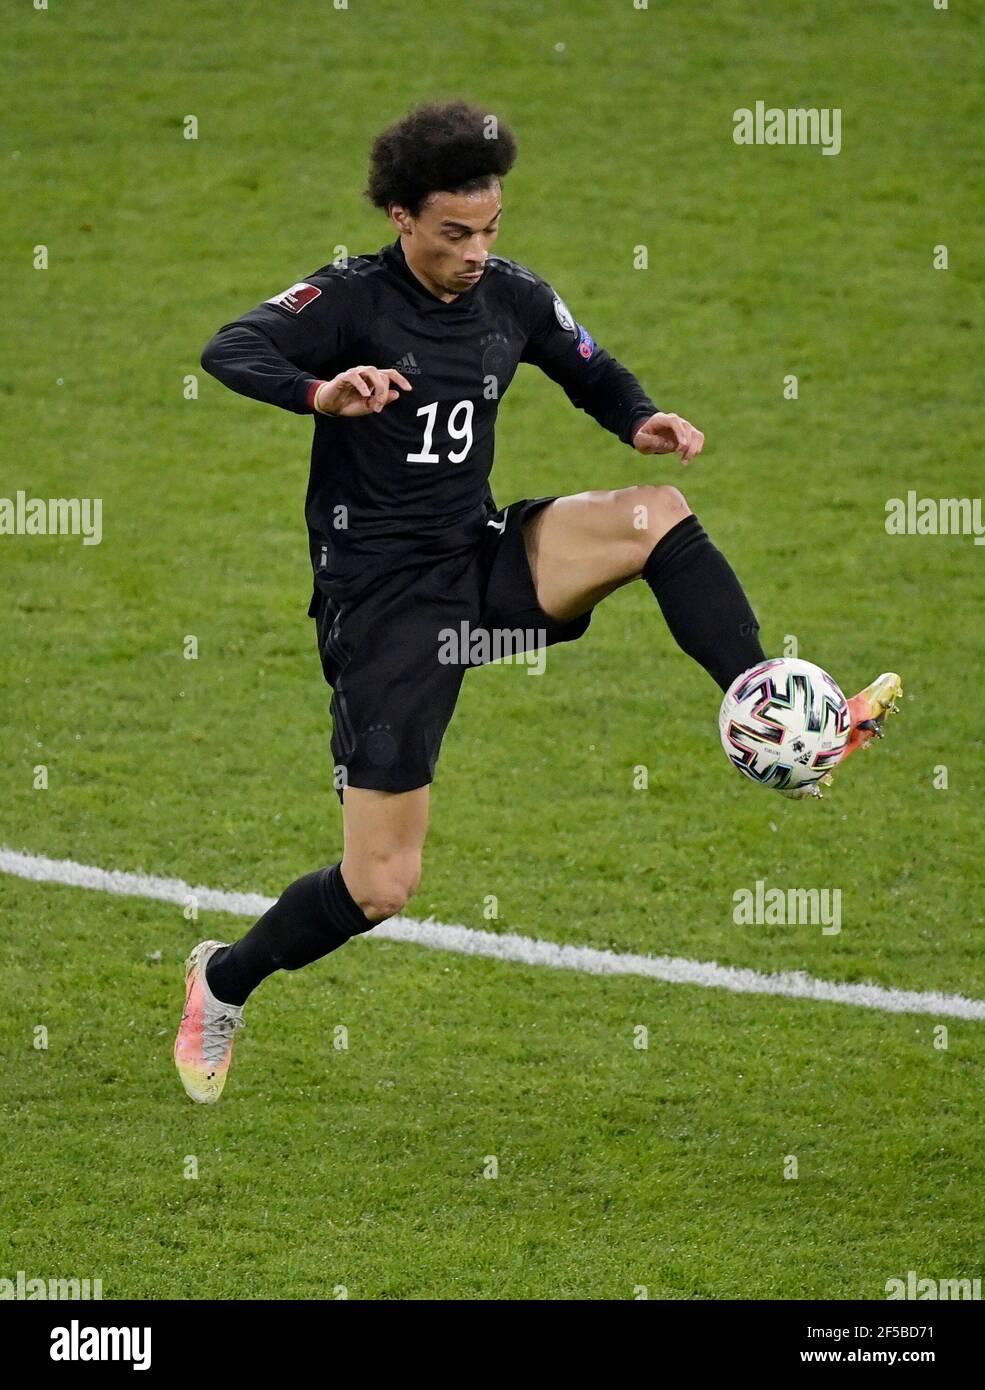 Soccer Football - World Cup Qualifiers Europe - Group J - Germany v Iceland - MSV-Arena, Duisburg, Germany - March 25, 2021 Germany's Leroy Sane in action REUTERS/Tobias Schwarz Stock Photo